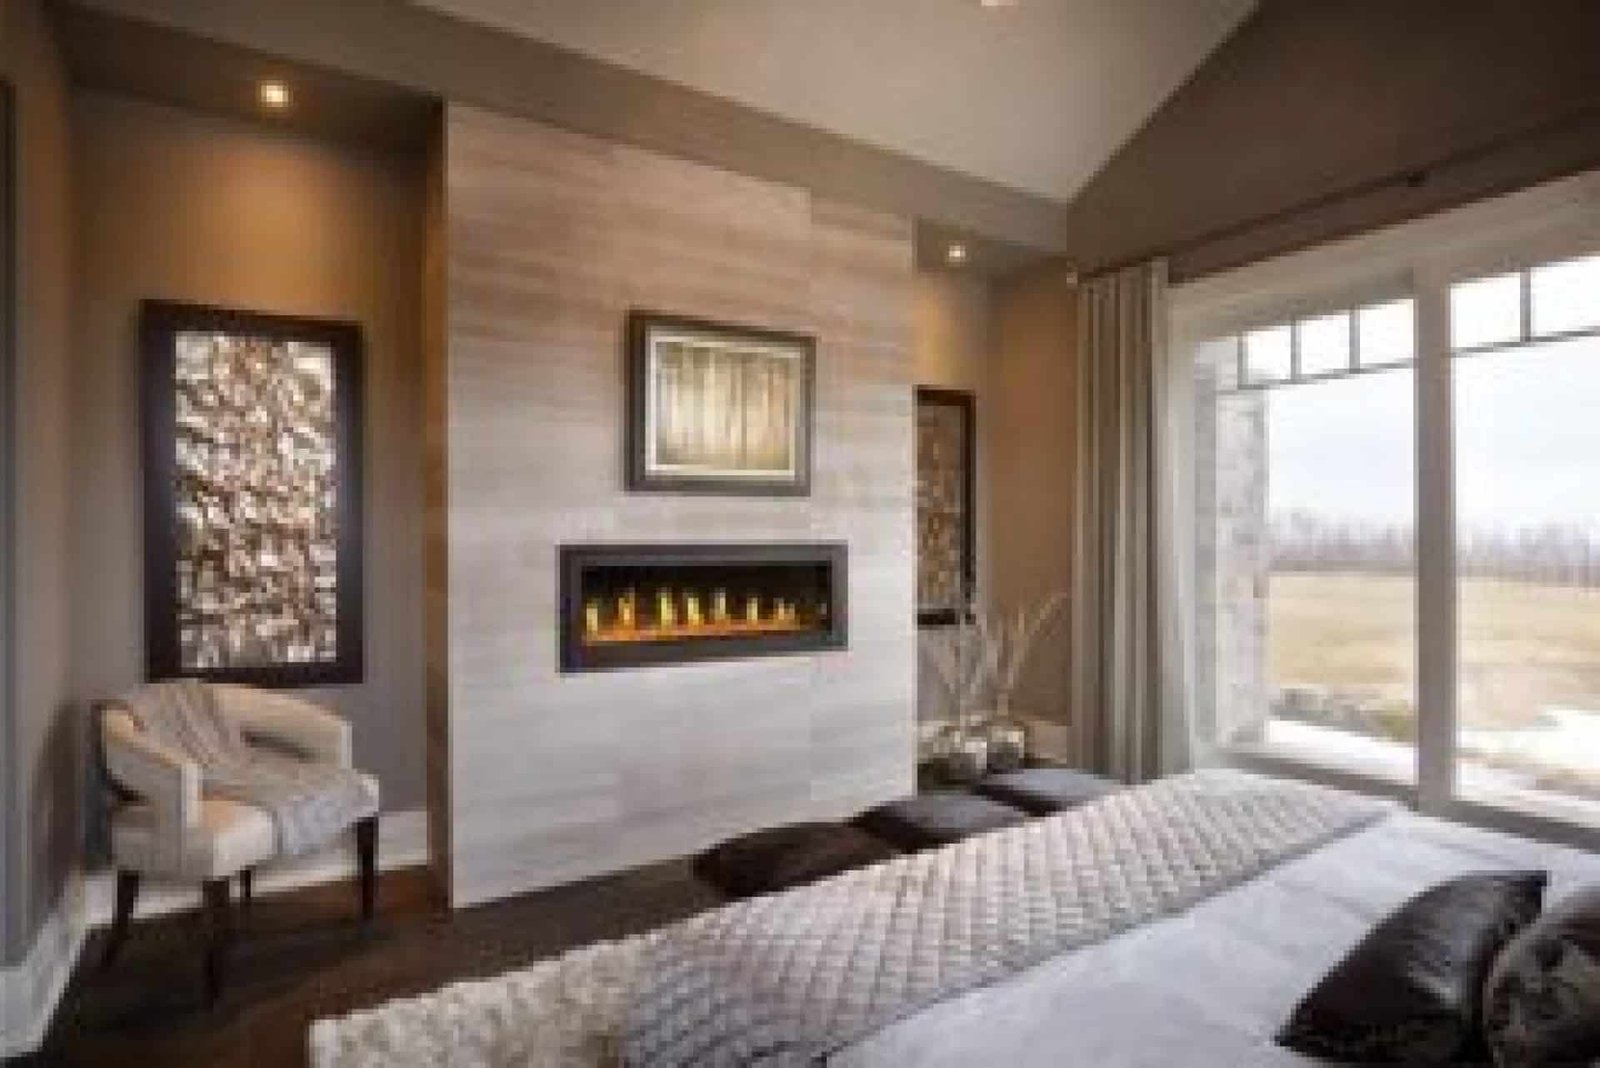 Top 8 Reasons For Choosing The Right Fireplace For Your Home